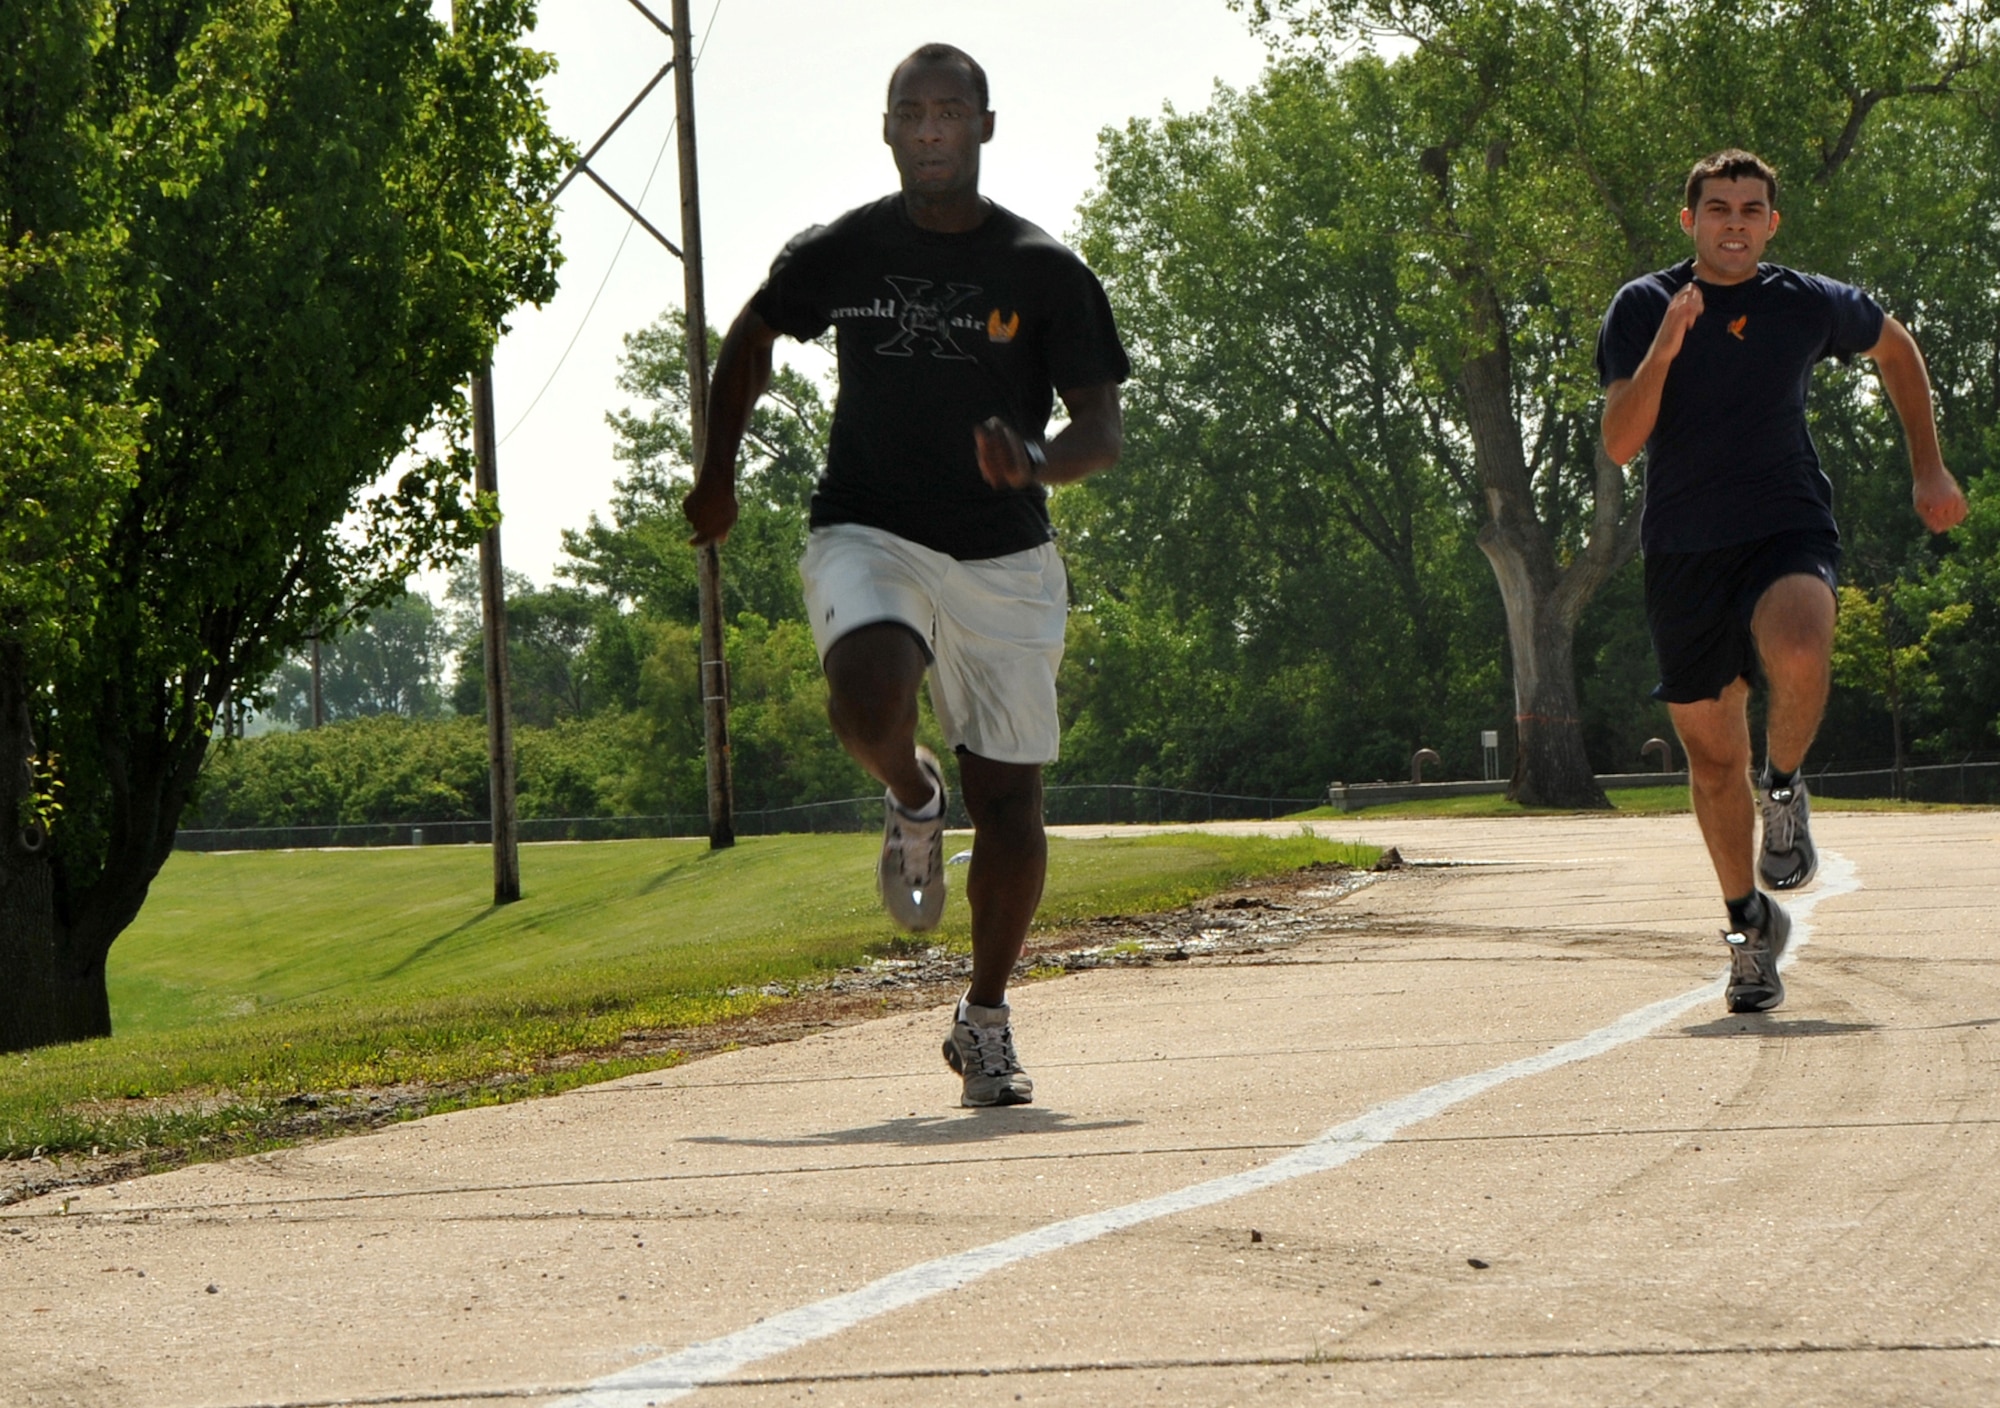 OFFUTT AIR FORCE BASE, Neb. - 1st Lt. David Omolayo from the 338th Combat Training Squadron, pulls ahead of James Butler, a Reserve Officer Training Corps cadet from the University of Nebraska at Omaha, in the 110 yard dash event here during the 55th Wing's annual Sports Day. Sports Day offered many events including  ultimate Frisbee, volleyball, a 5K race and much more. The event is designed to promote good health and increase unit morale. U.S. Air Force Photo by Jeff W. Gates.